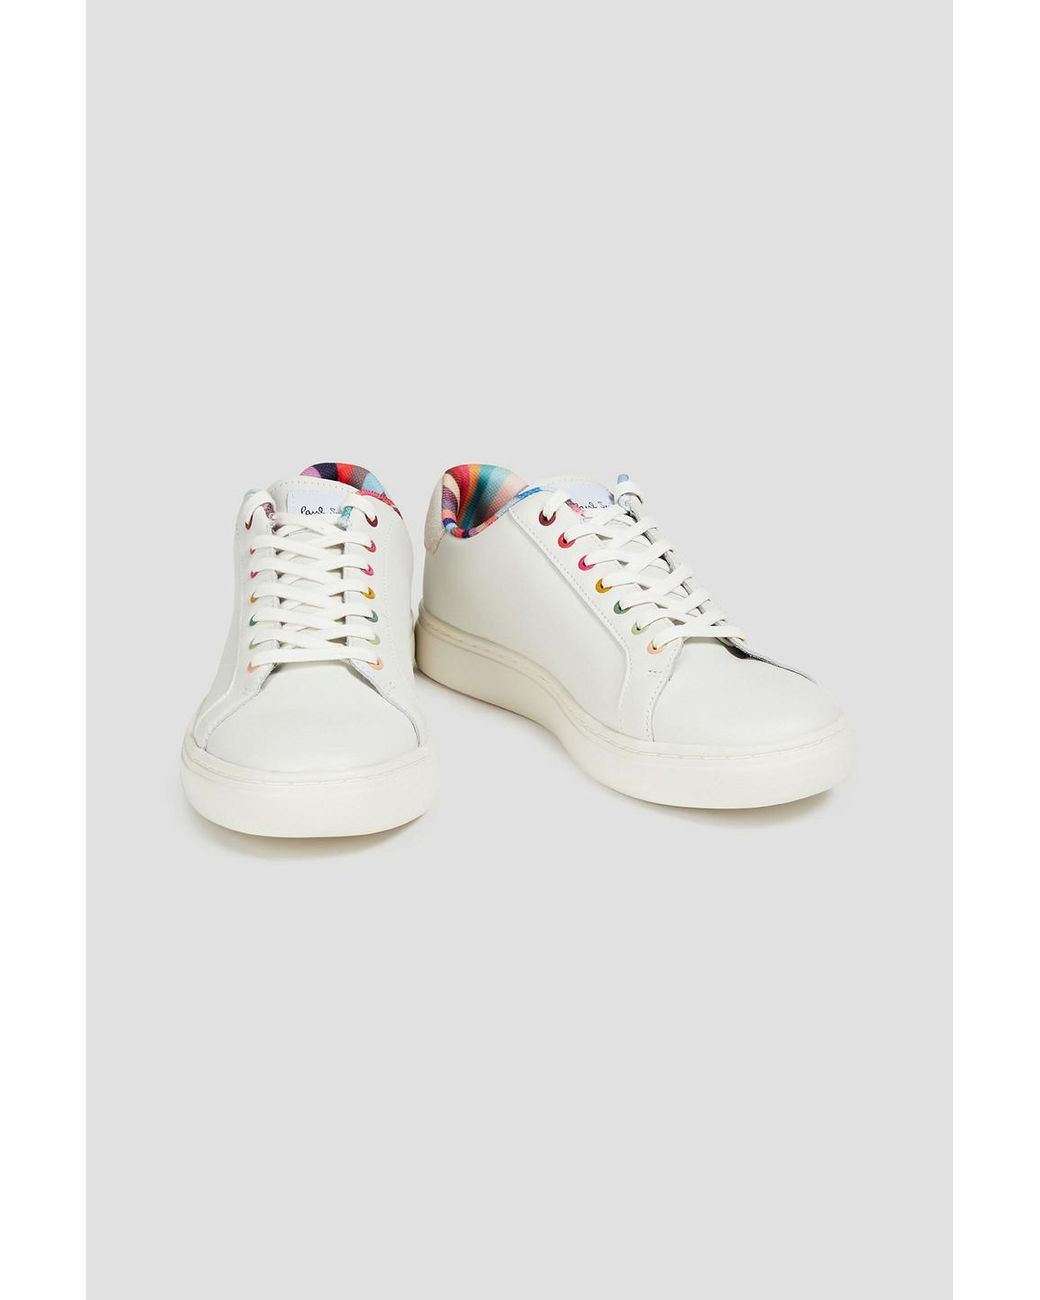 Paul Smith Lapin Leather And Suede Sneakers in White | Lyst